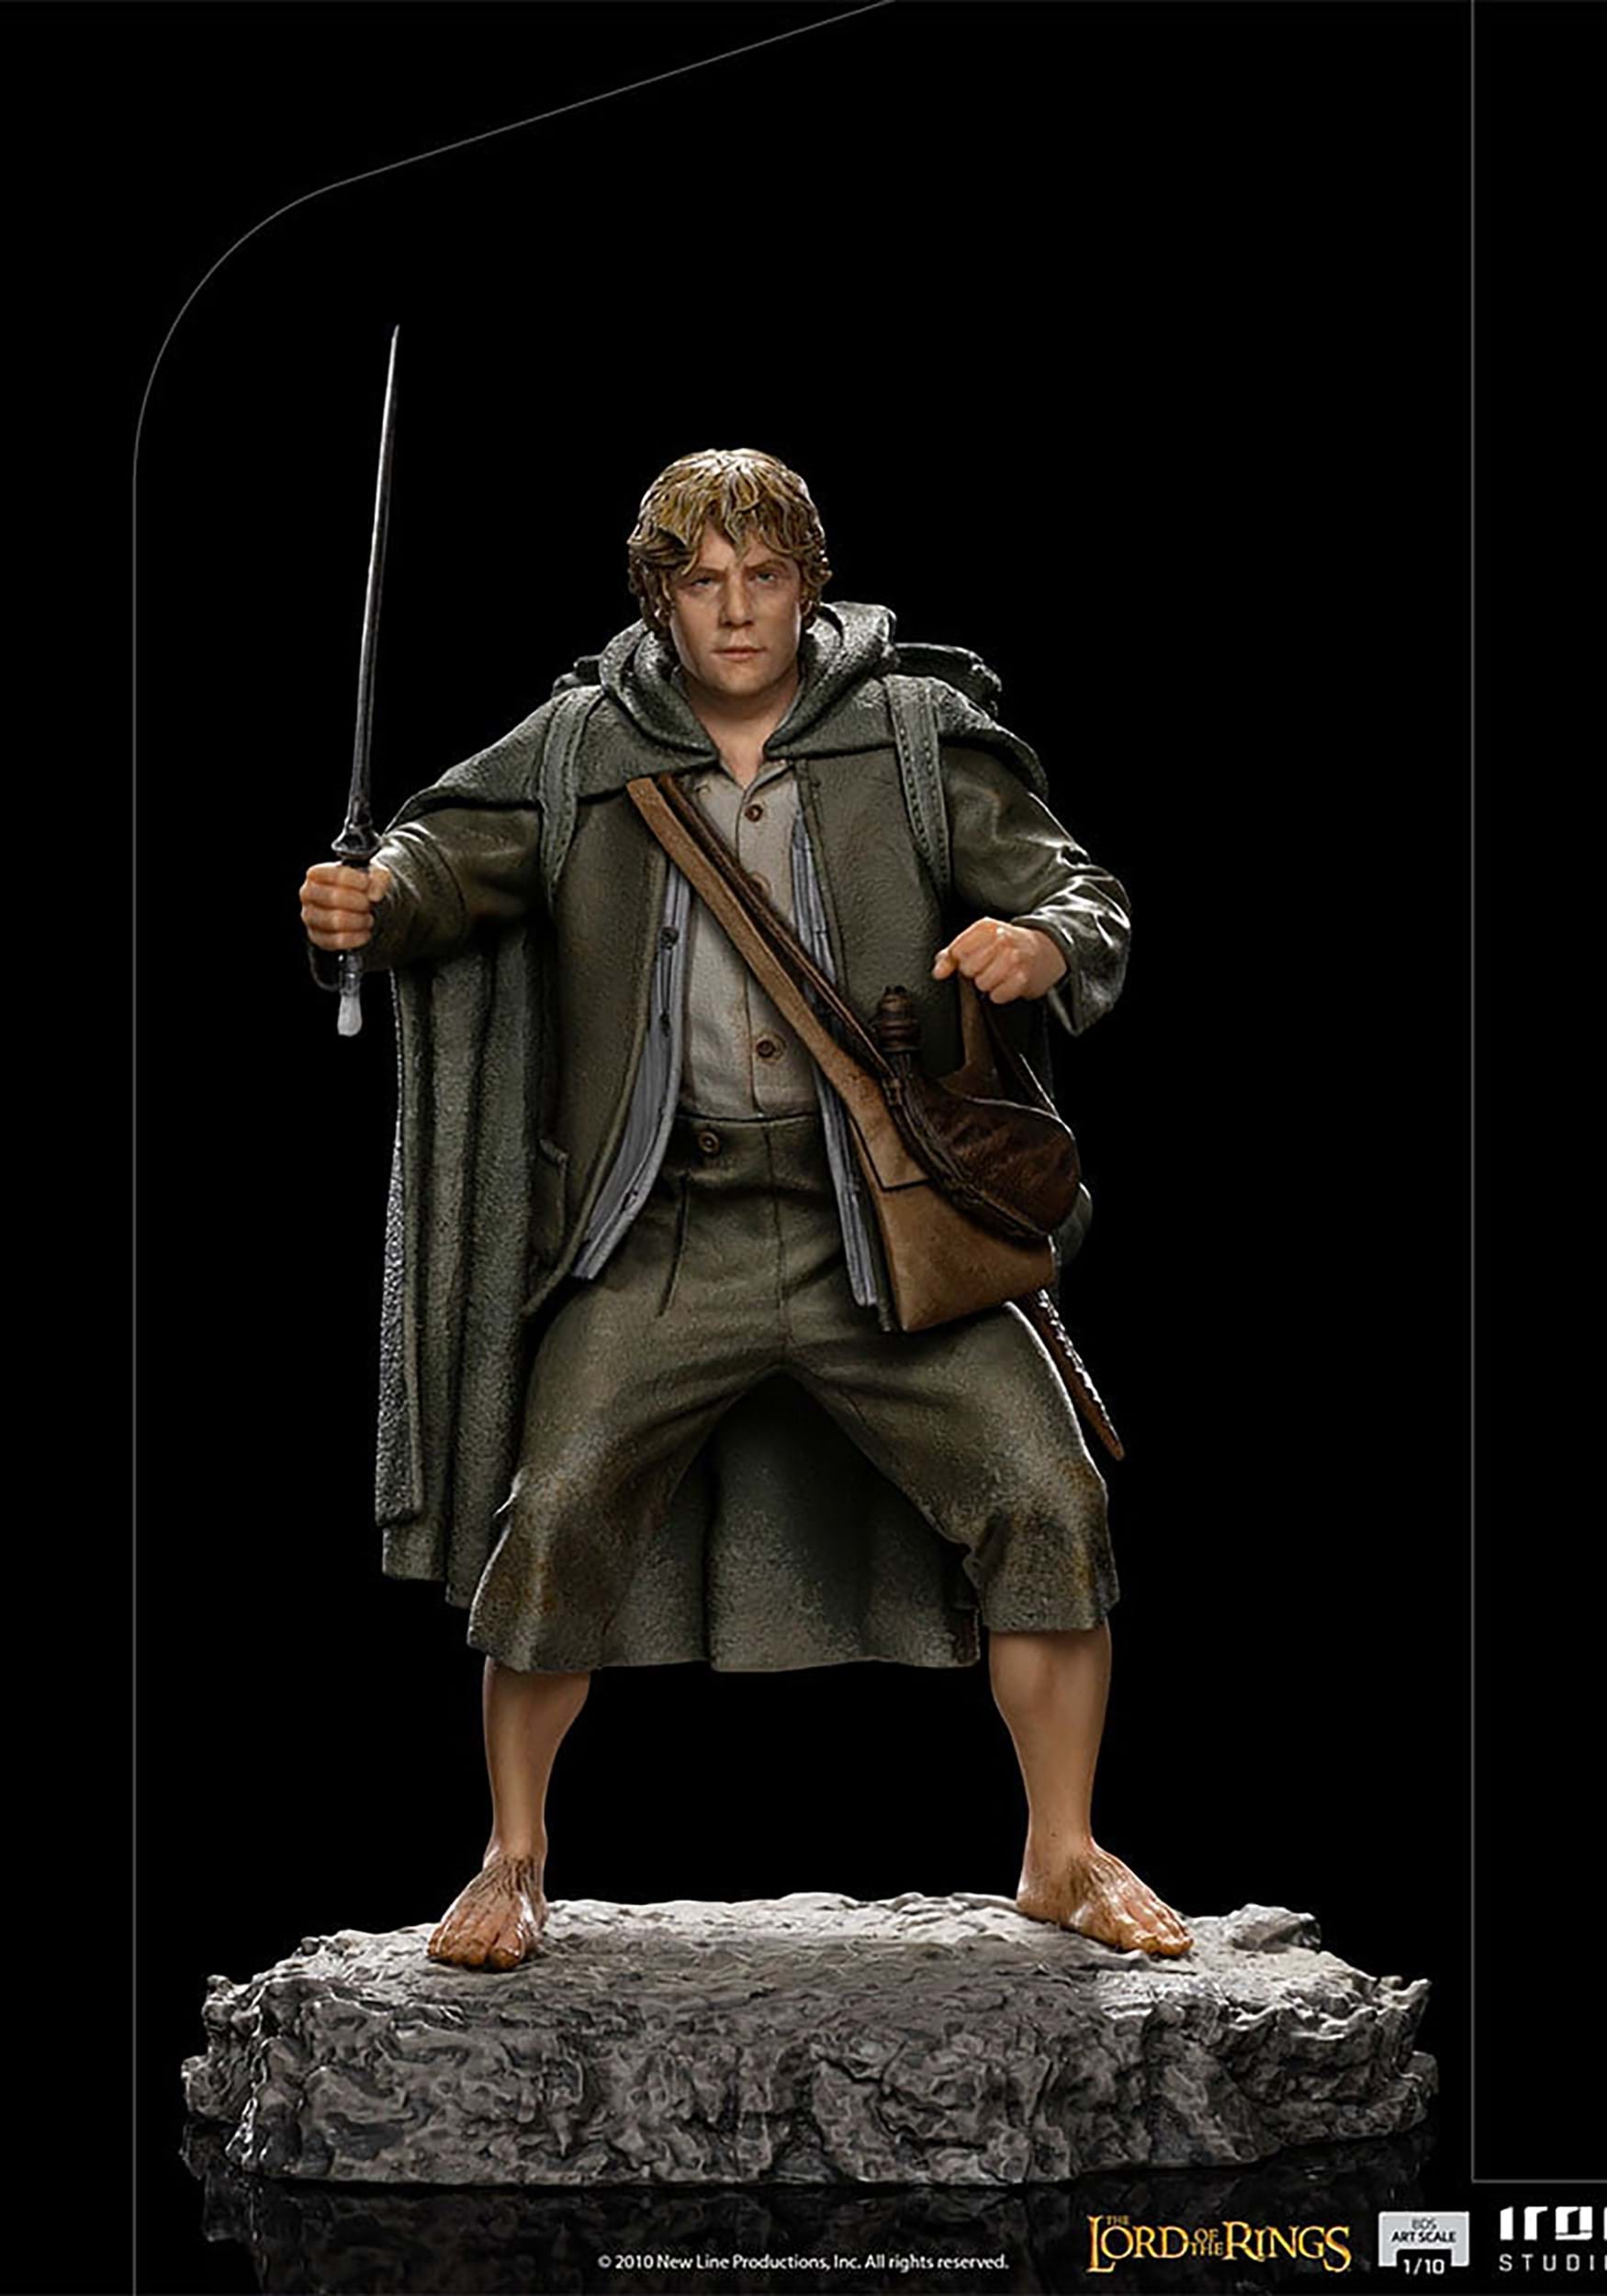 𝙎𝙖𝙢𝙬𝙞𝙨𝙚 𝙂𝙖𝙢𝙜𝙚𝙚 𝙄𝙘𝙤𝙣 | Lord of the rings, Samwise gamgee,  The hobbit